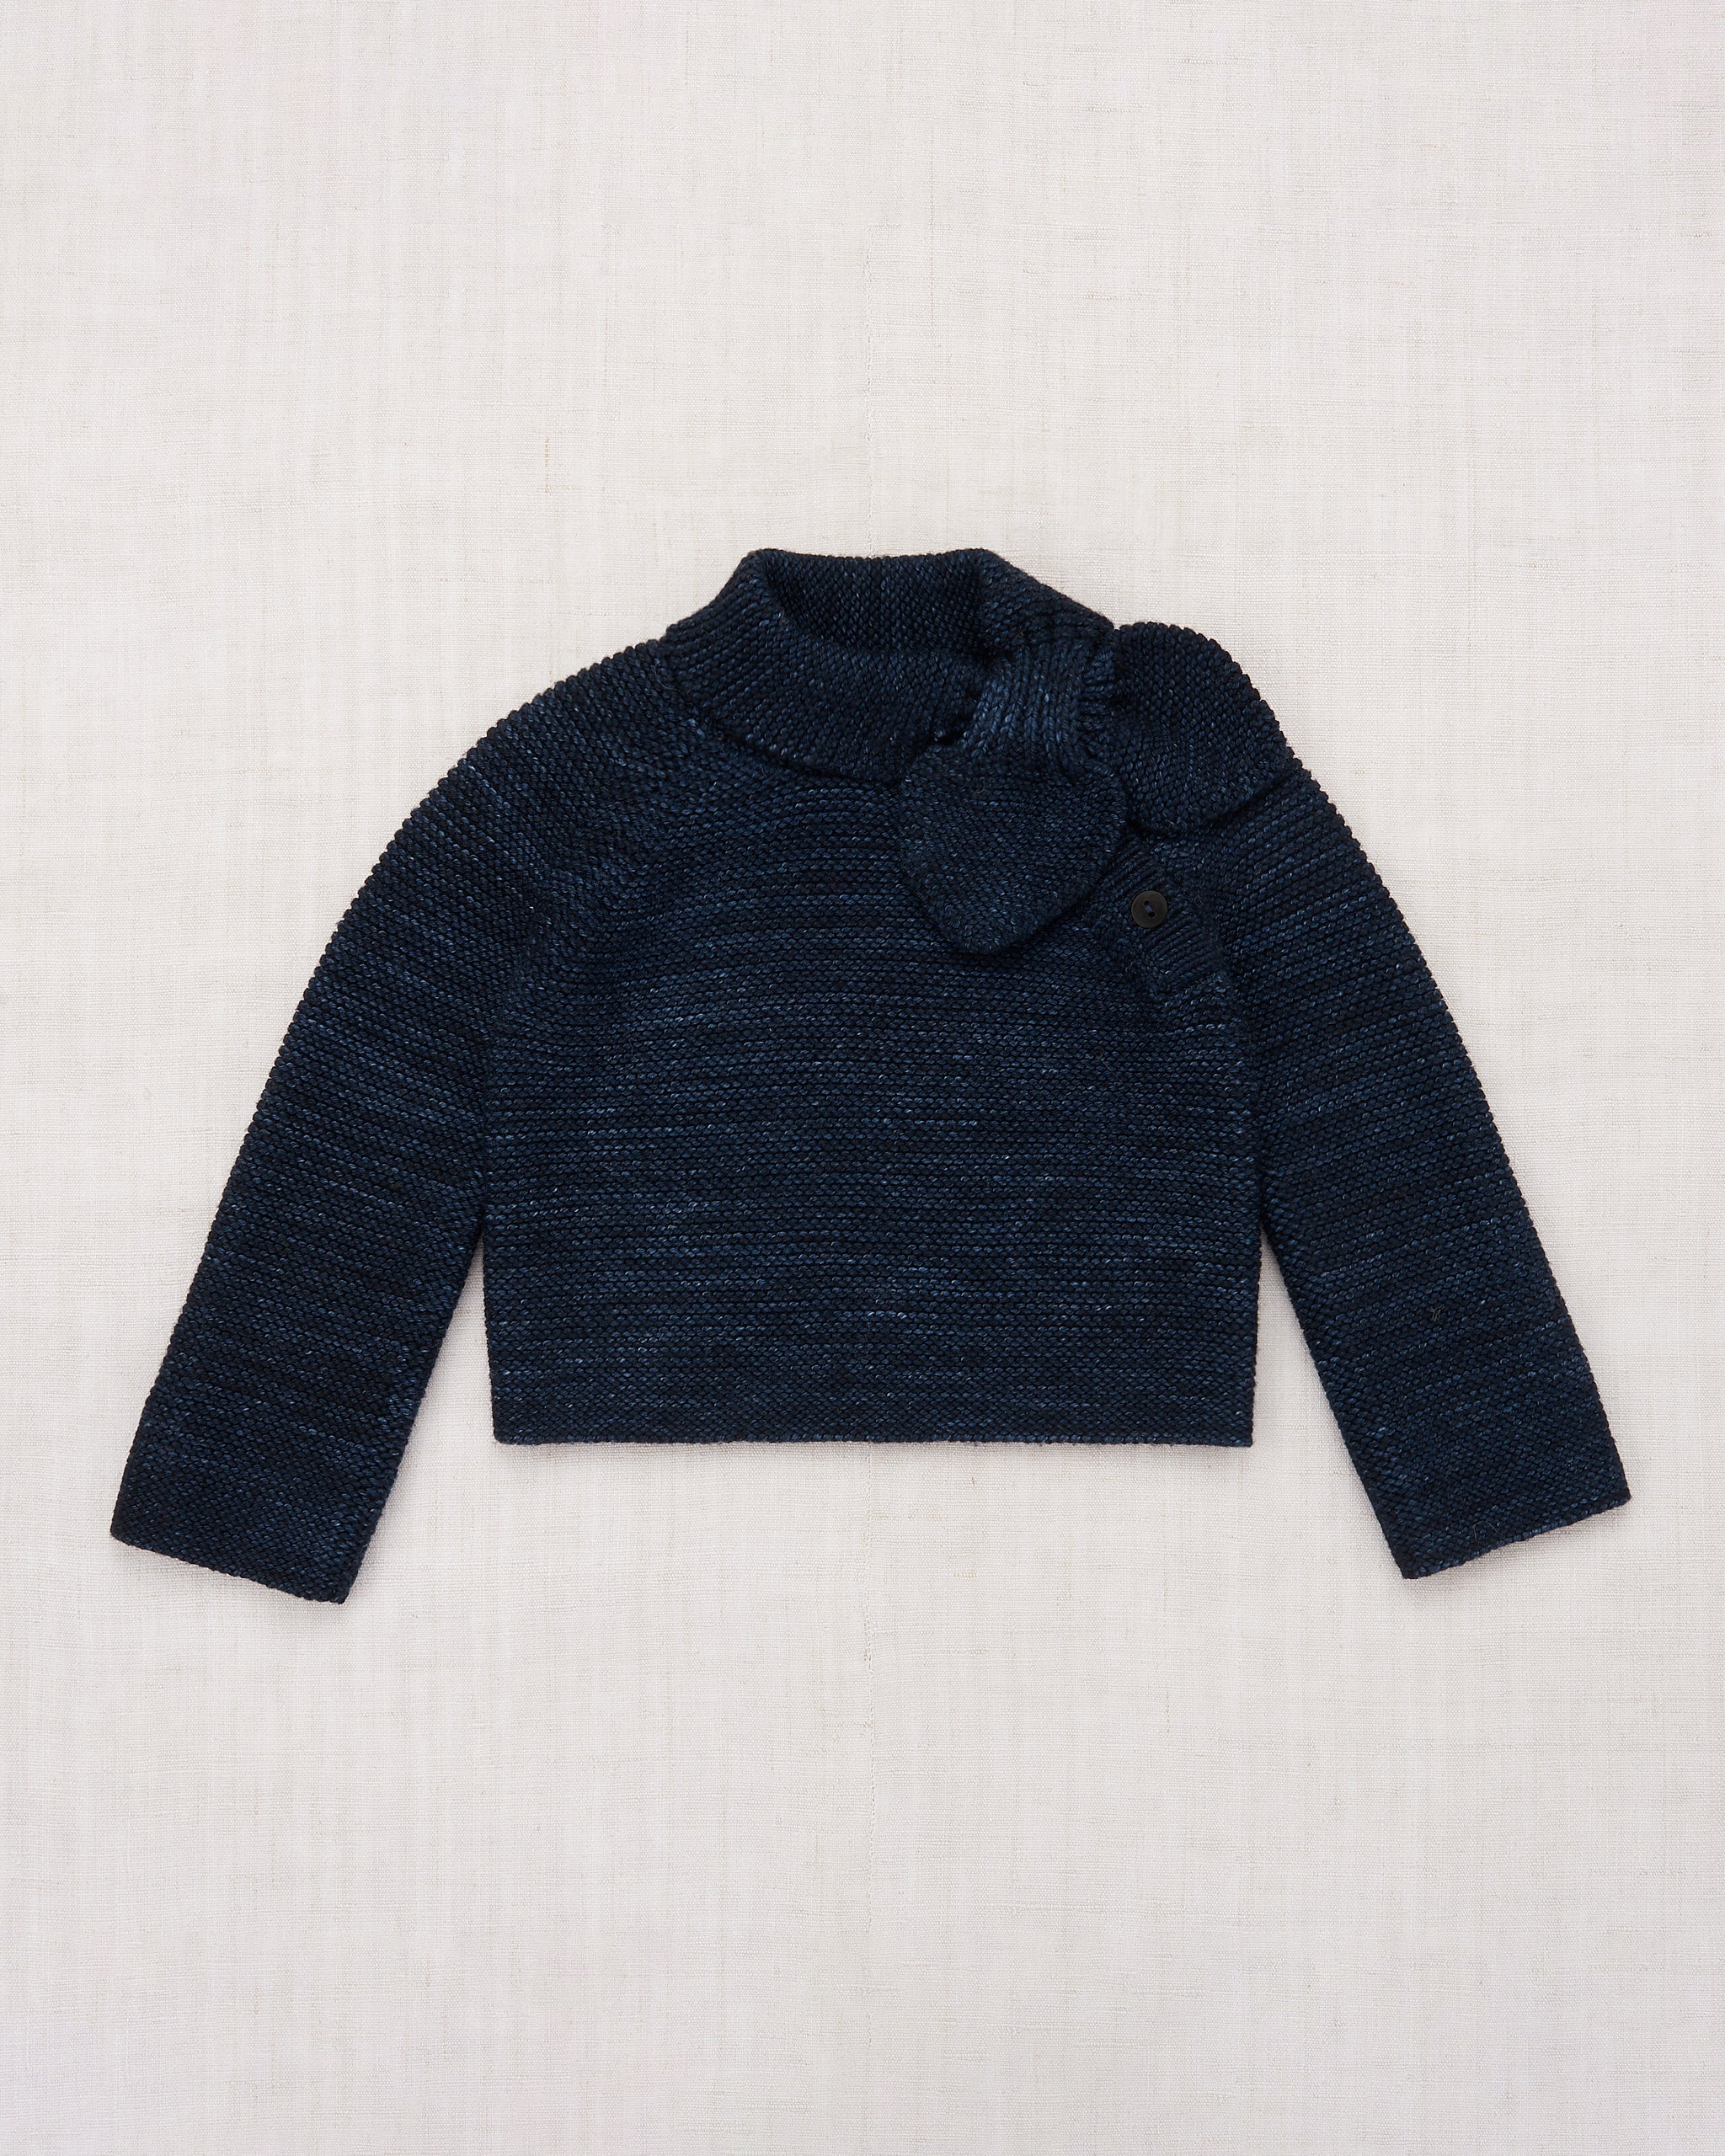 Misha and puff bow scout sweaterキッズ/ベビー/マタニティ